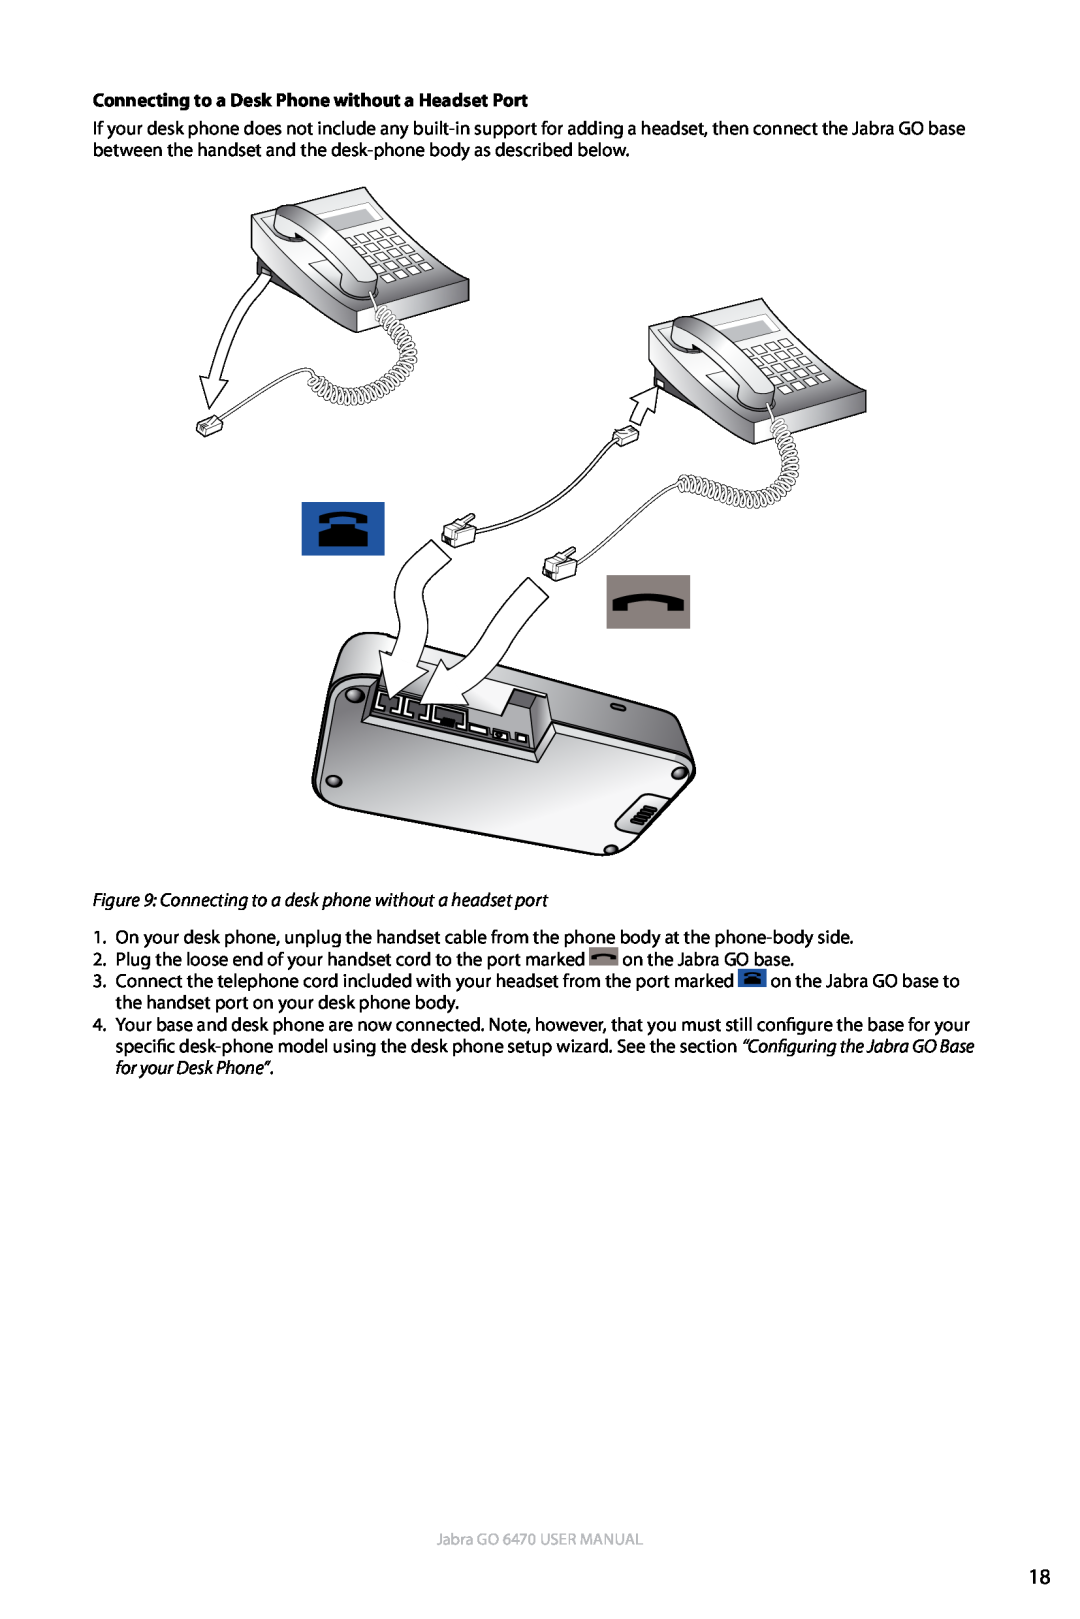 Jabra GO 6470 user manual Connecting to a Desk Phone without a Headset Port 